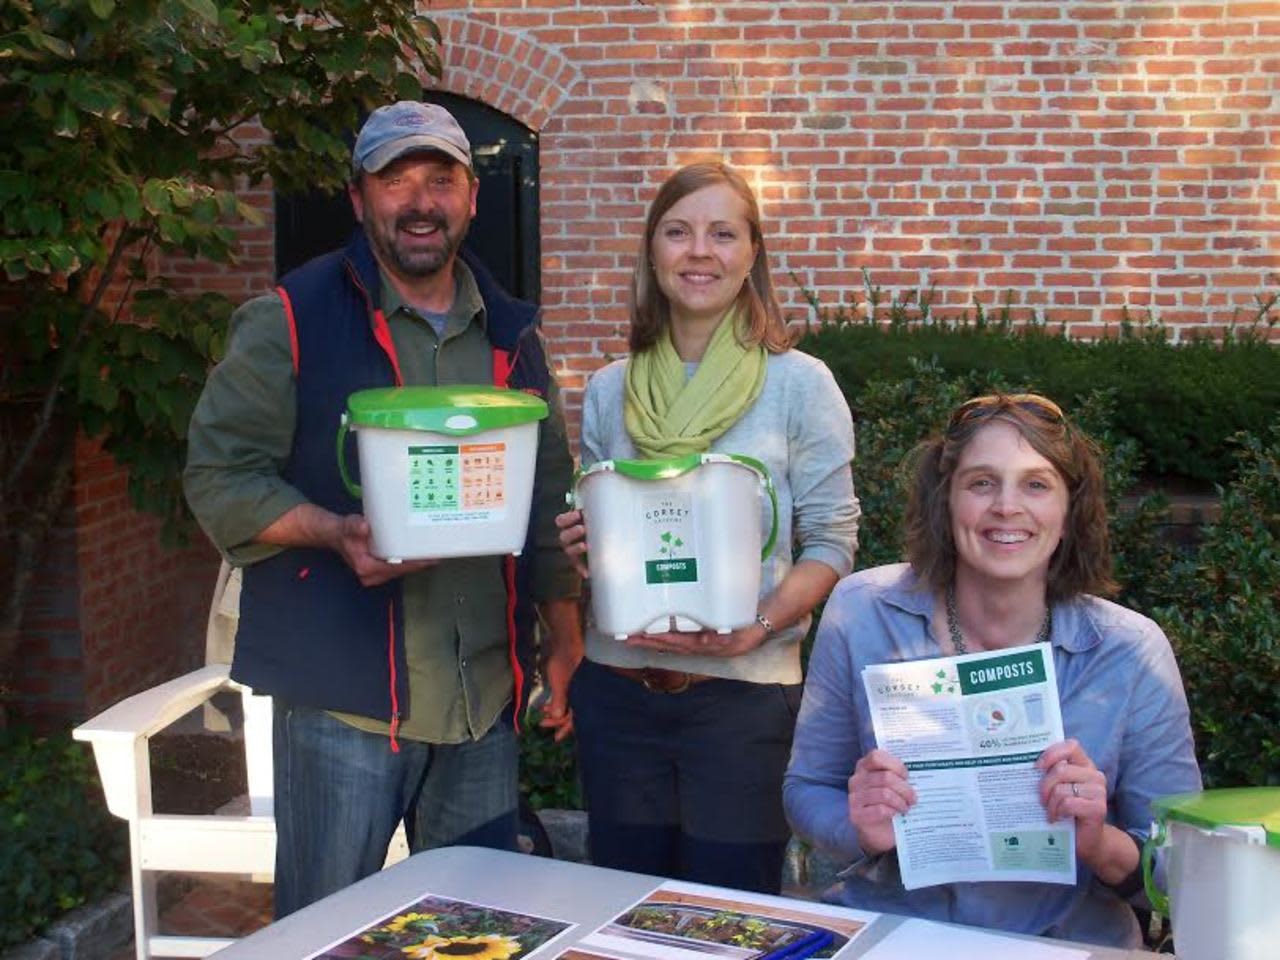 Pictured (From L to R): Jeff Demers, Owner, New England Compost, Danbury; Katrina Kazda, Director of Programs, Sustainable America, Stamford; Tilly Hatcher, Project Manager, Spinnaker Real Estate Partners, South Norwalk.